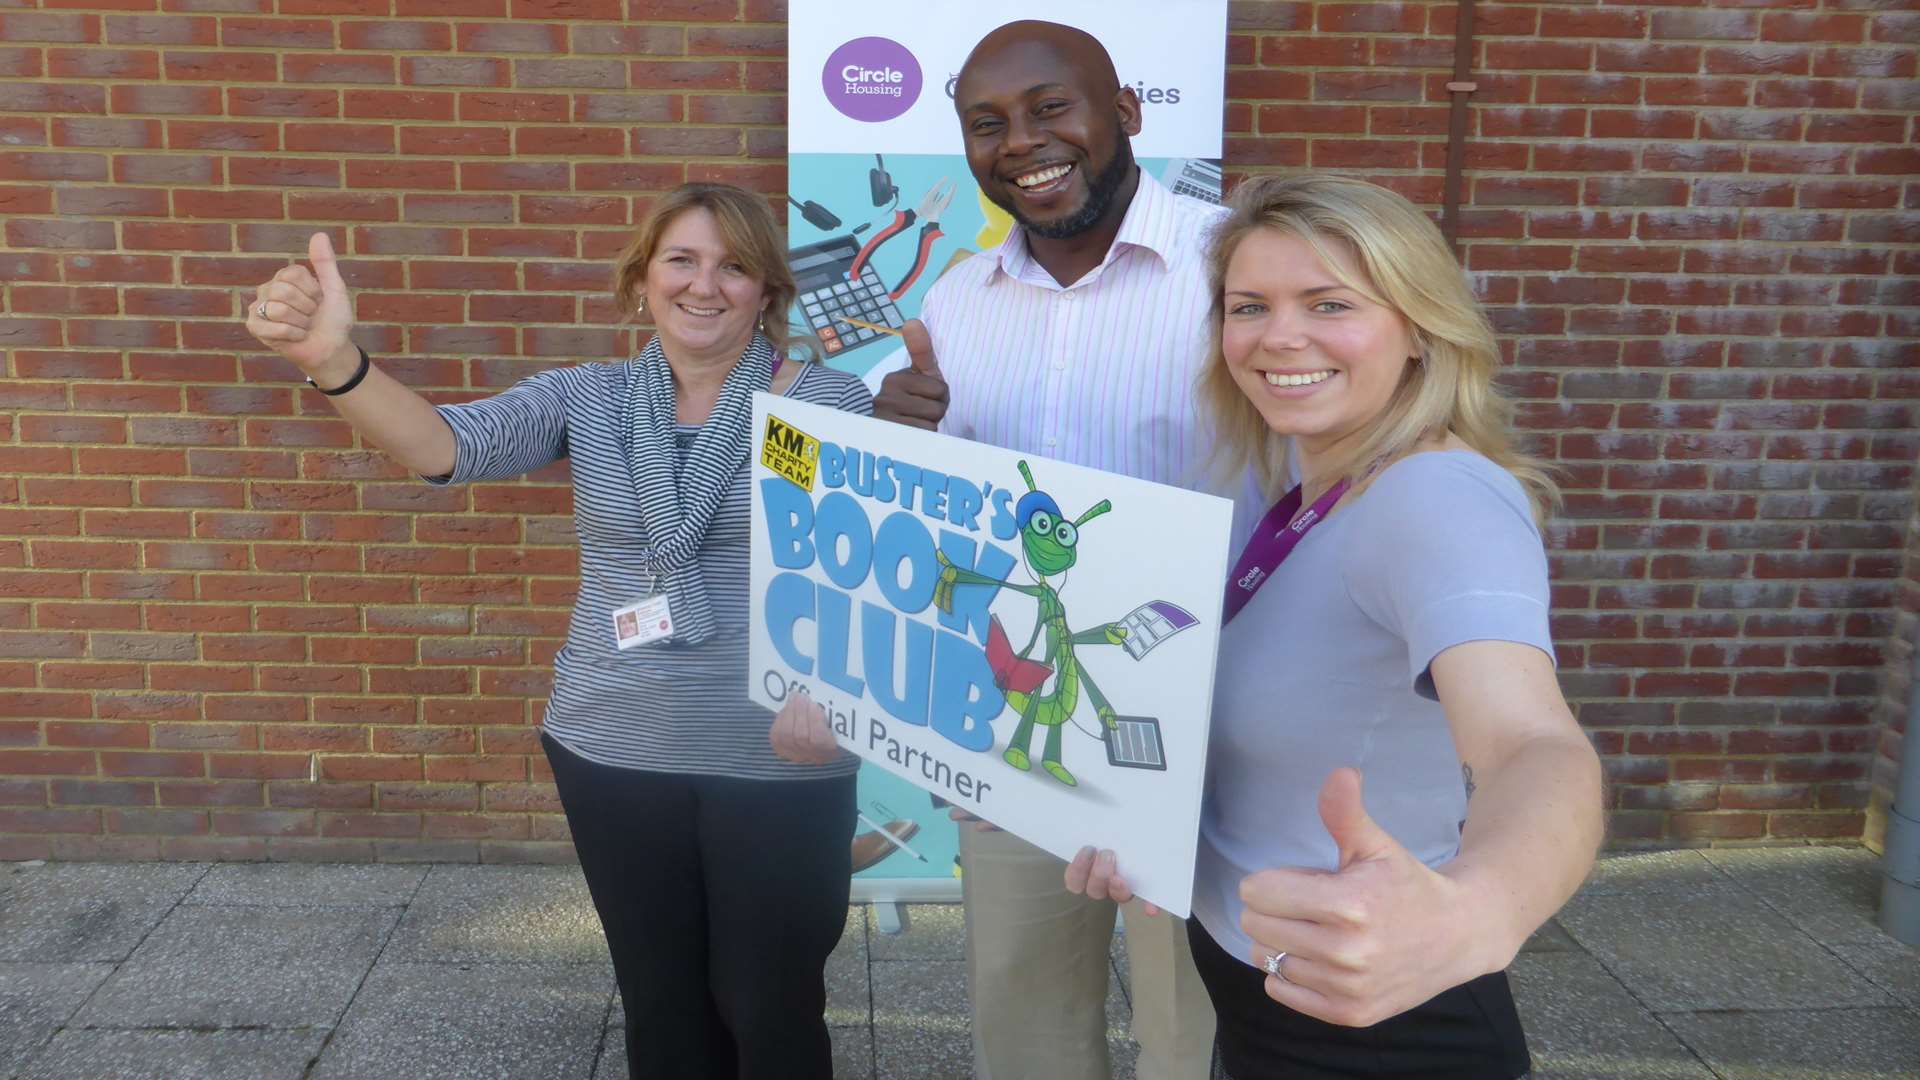 Sheena Field, Roy Morgan and Emily Foster of Circle Housing Russet which is supporting the KM reading scheme for schools Buster's Book Club.